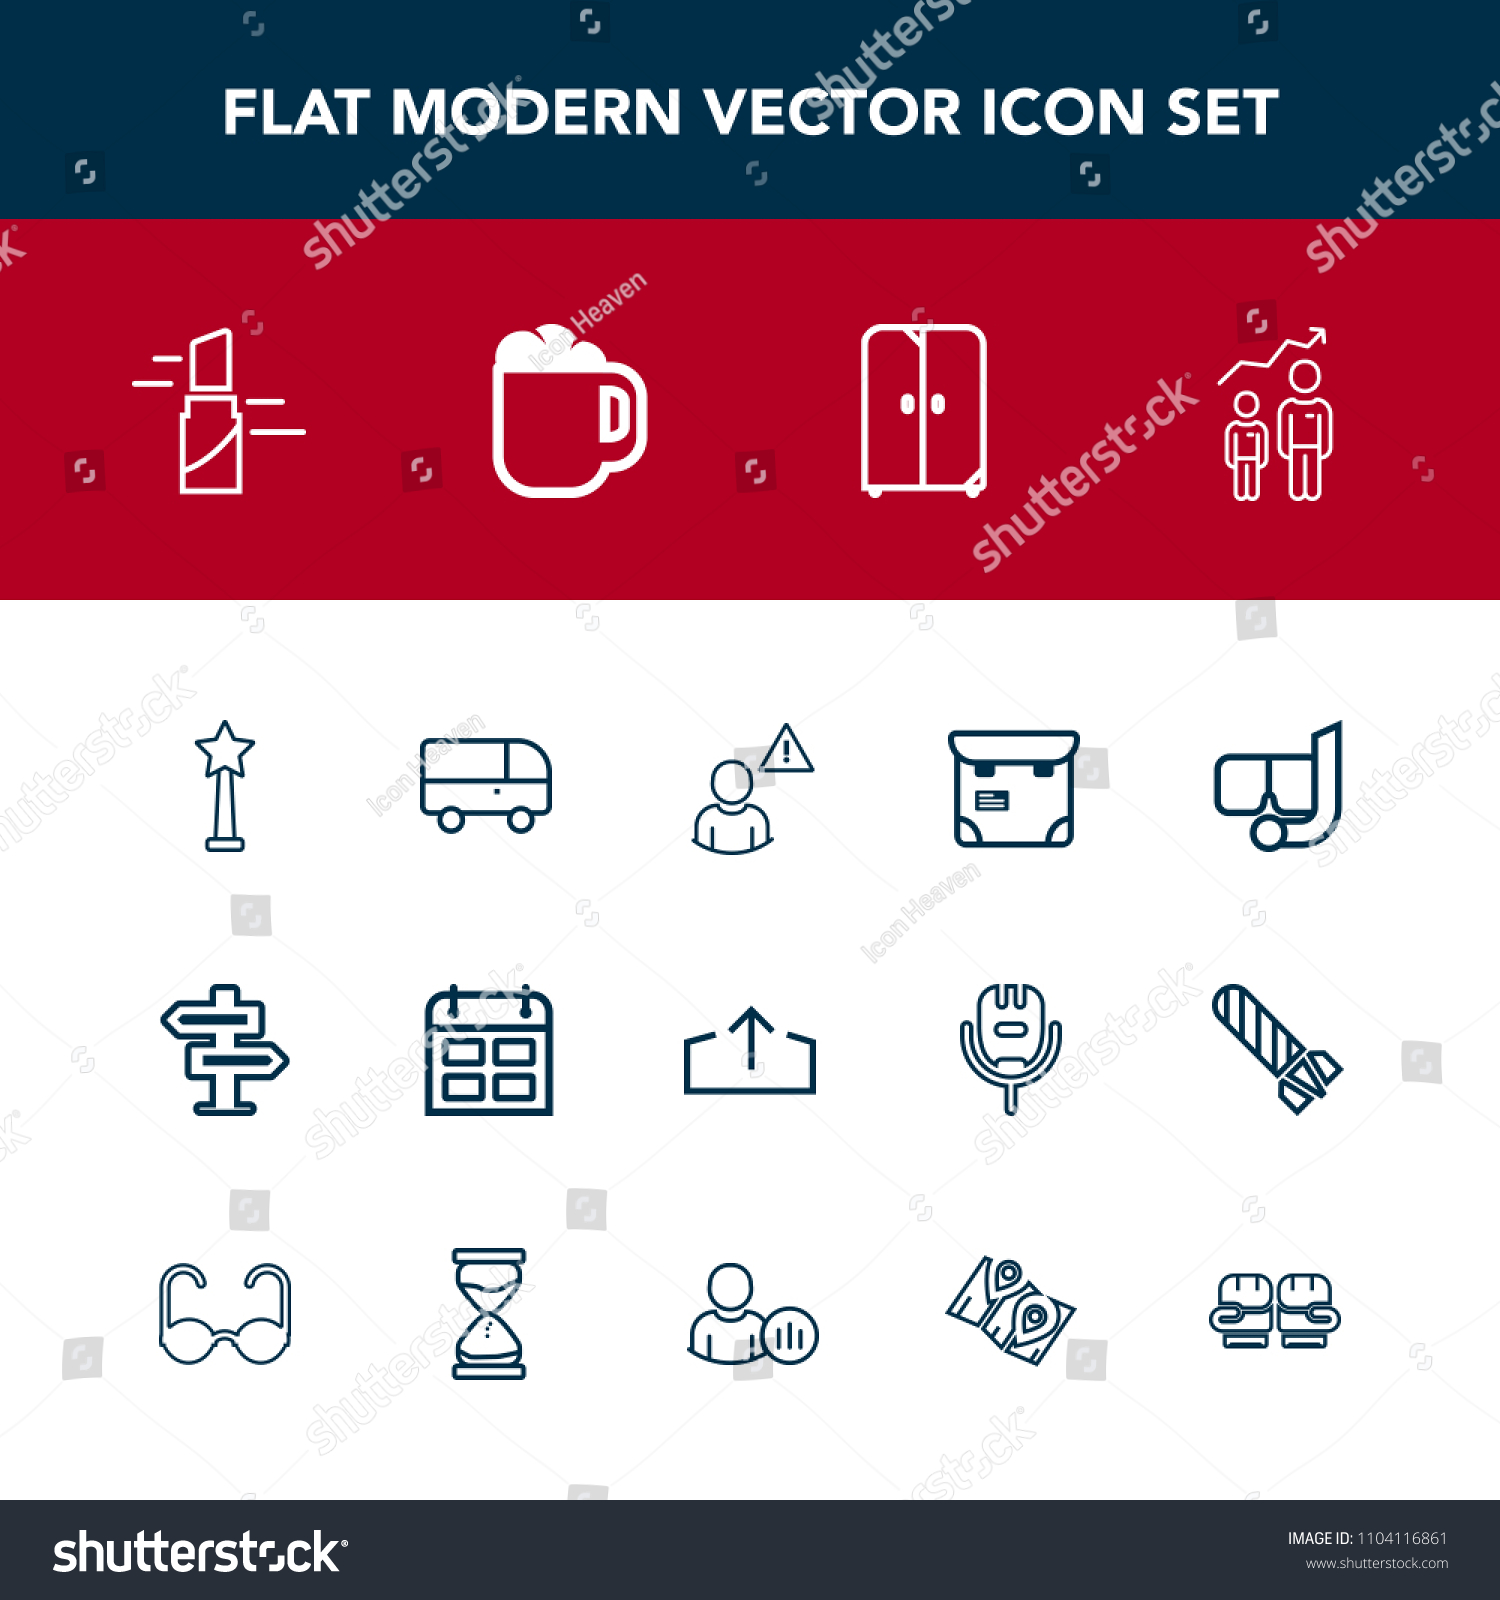 Modern Simple Vector Icon Set Download Stock Vector Royalty Free 1104116861 Find images of calendar icon. shutterstock